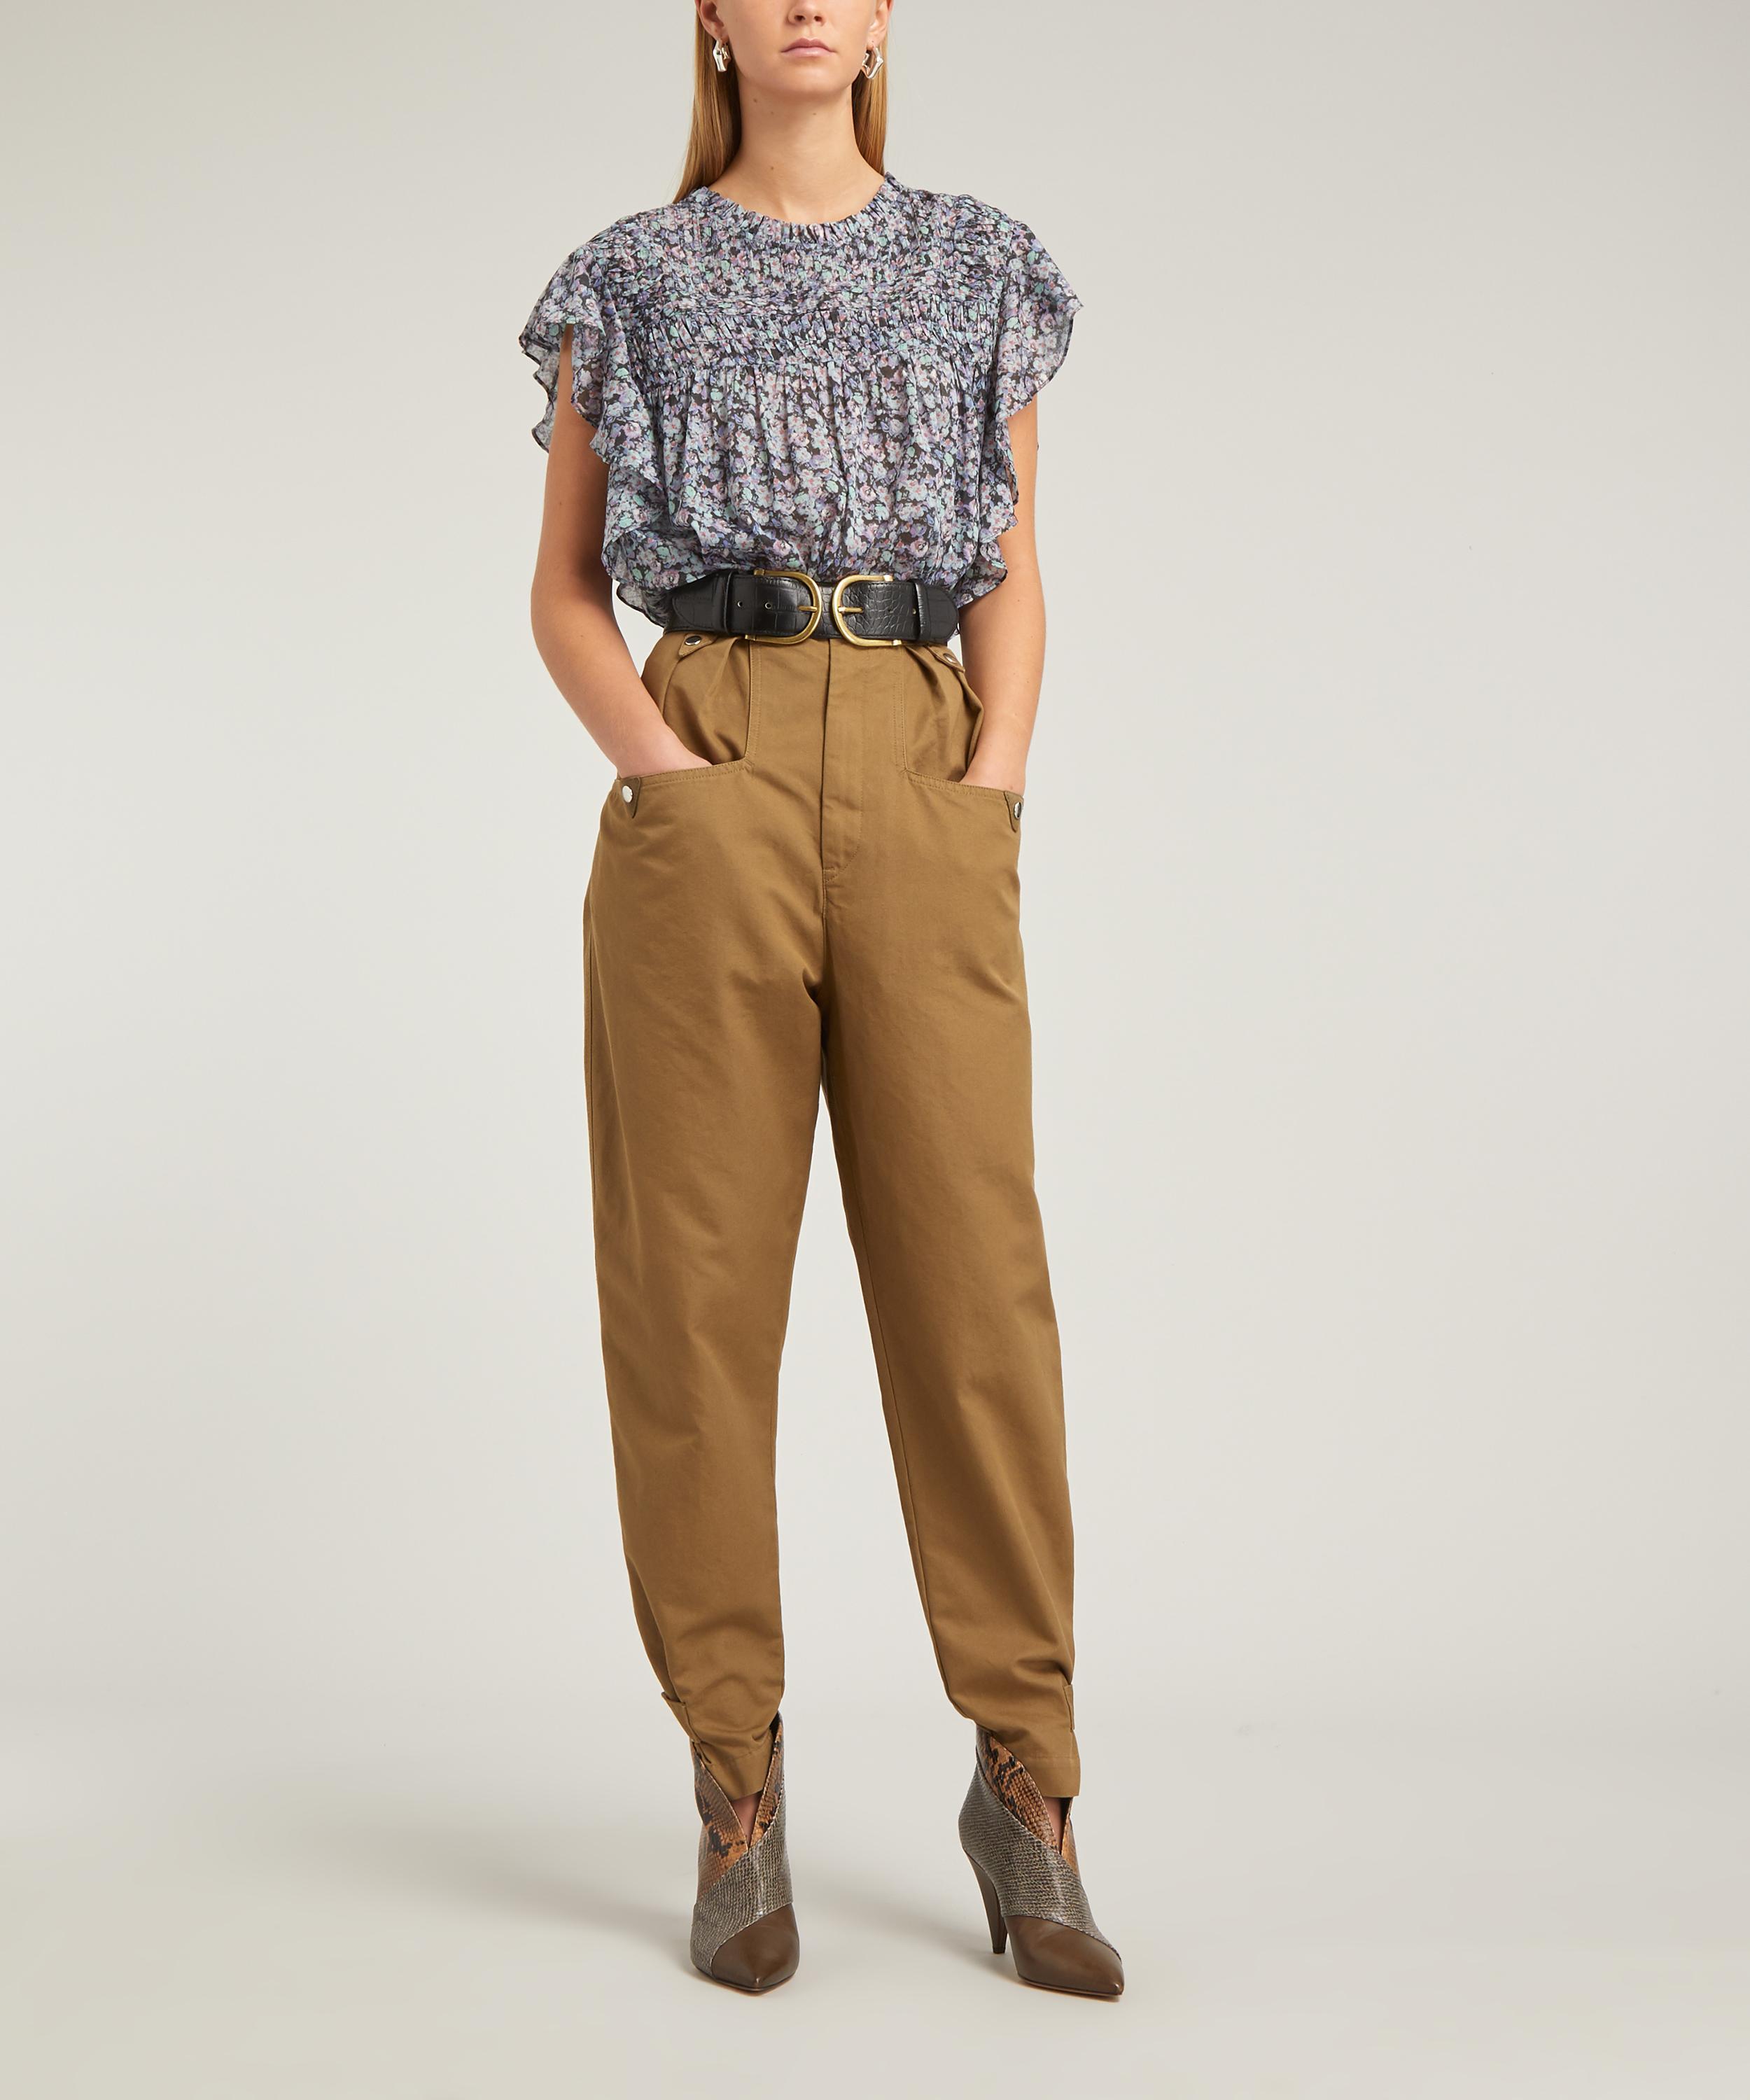 TISO PANTS-KHAKI | ISABEL MARANT – FOR ARTISTS ONLY